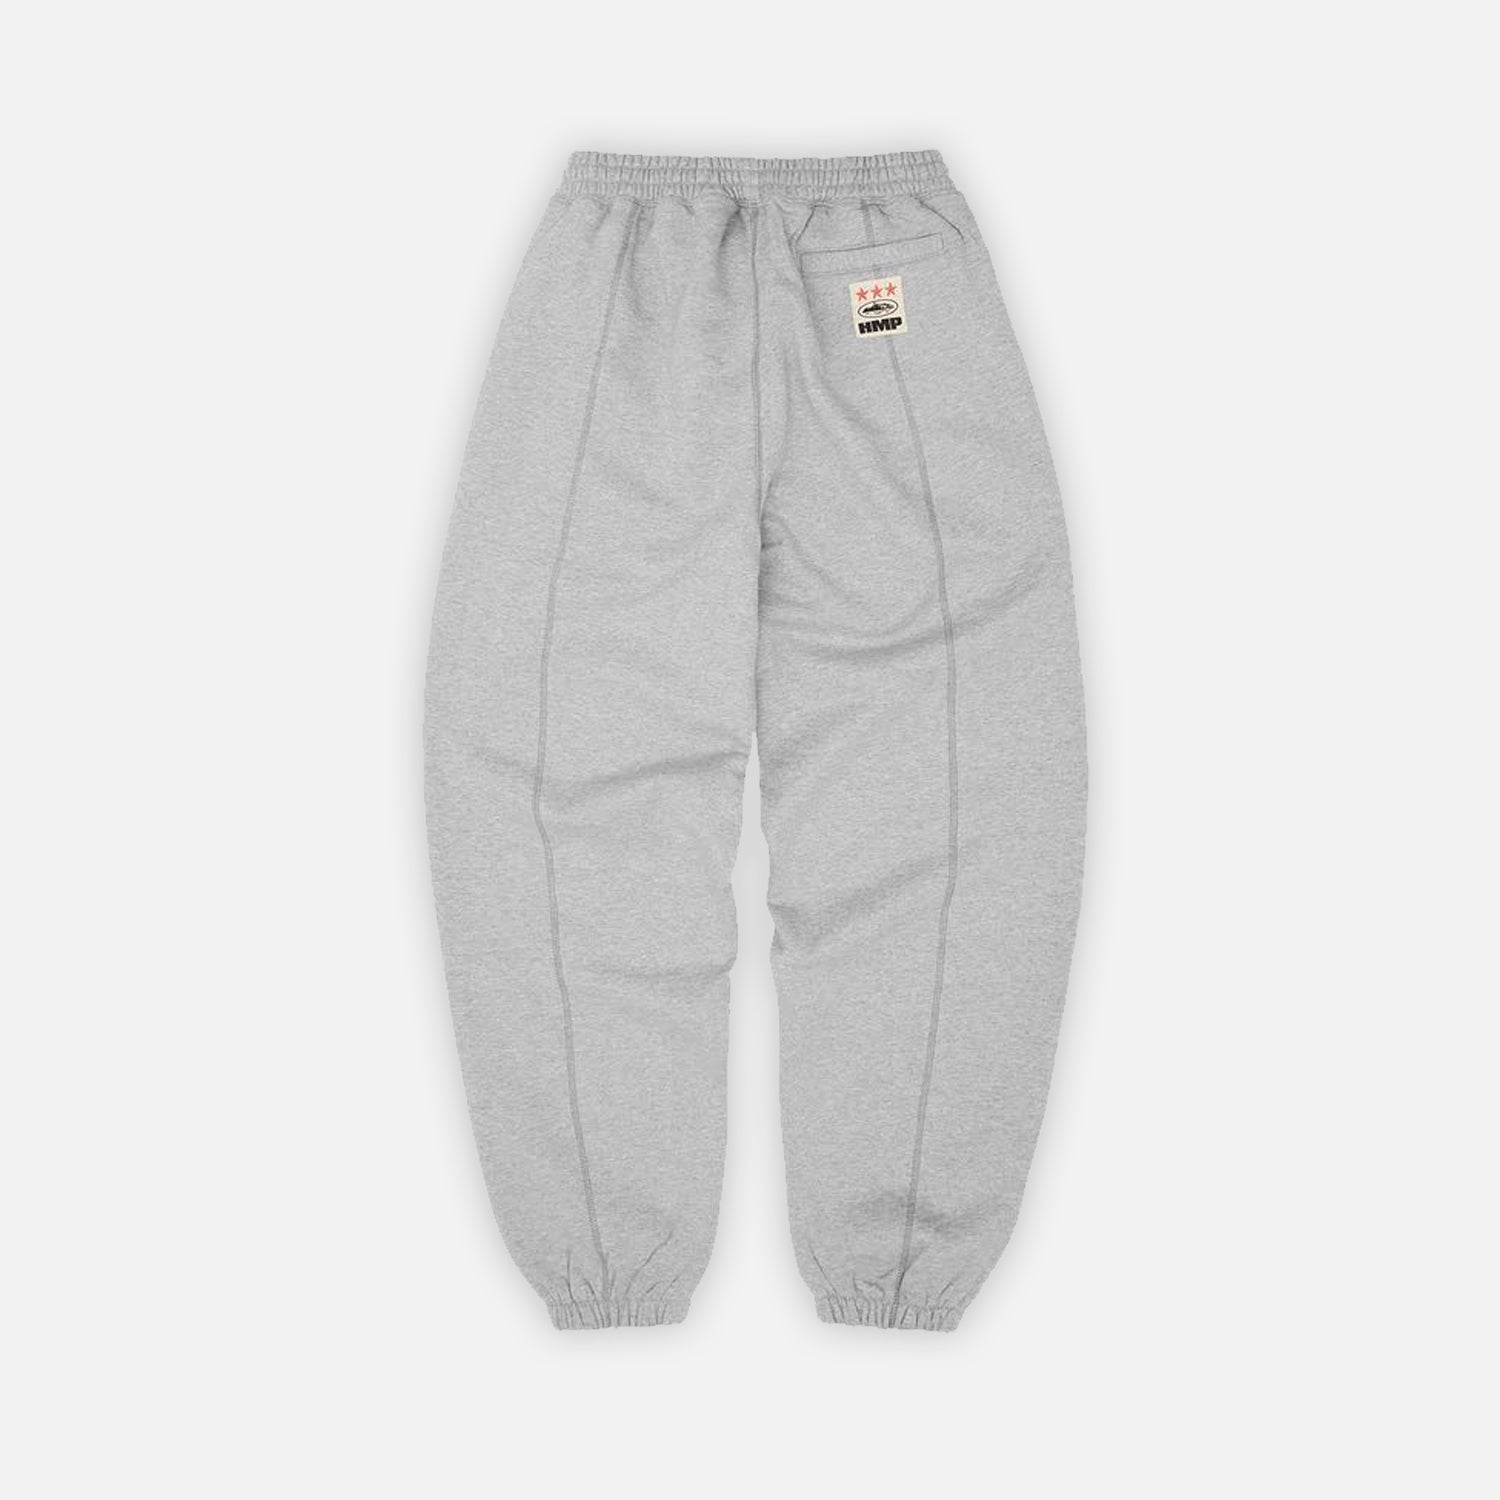 Trapstar Embroidered Letters Print Tech Fleece Pants Autumn/Winter Casual  Corteiz Sweatpants For Men And Women From Superca, $31.48